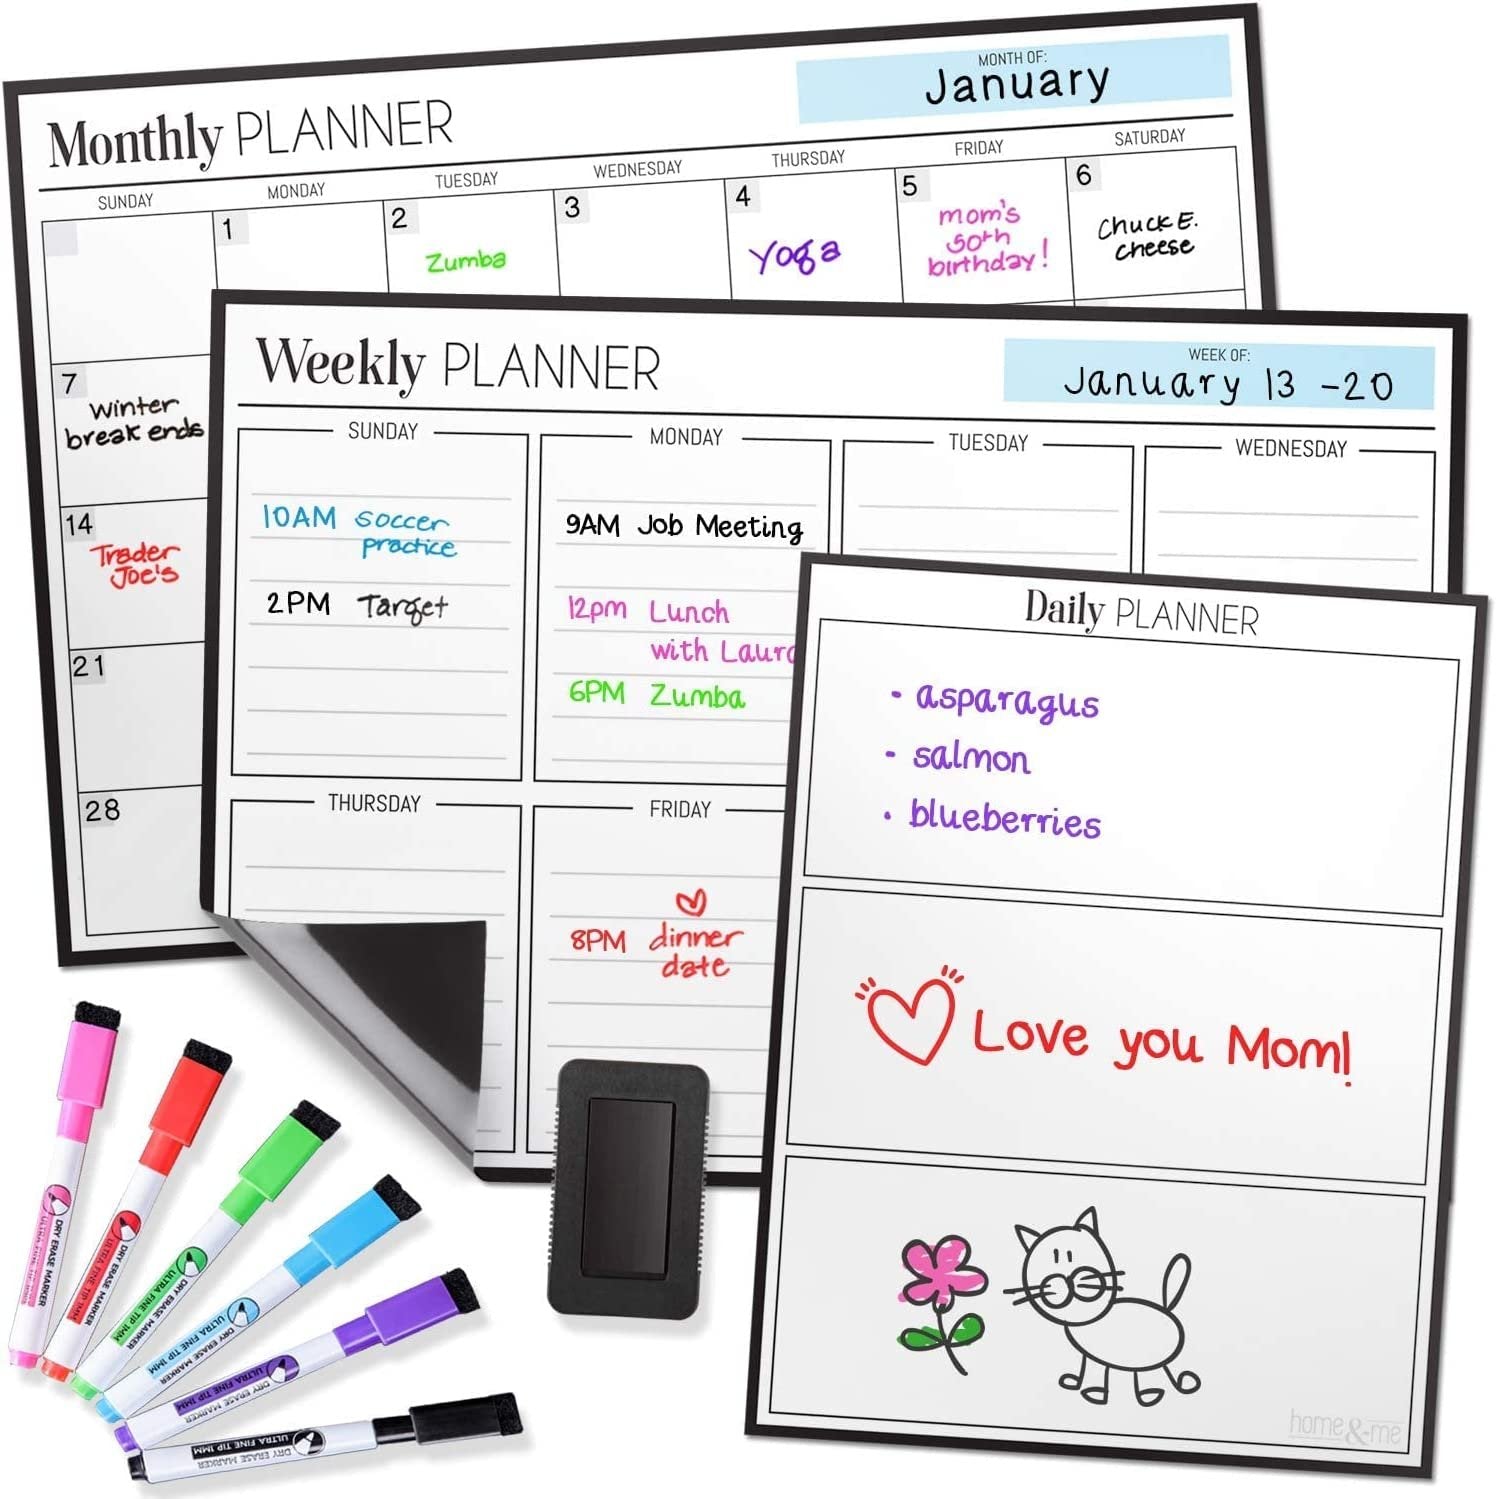 Magnetic Calendar Bundle: 3 Boards Included 17"x12" - Monthly, Weekly, Daily - Fridge Calendar Dry Erase Magnetic - Calendar Whiteboard - 6 Fine Tip Markers, Large Eraser, Magnets, Fridge Whiteboard